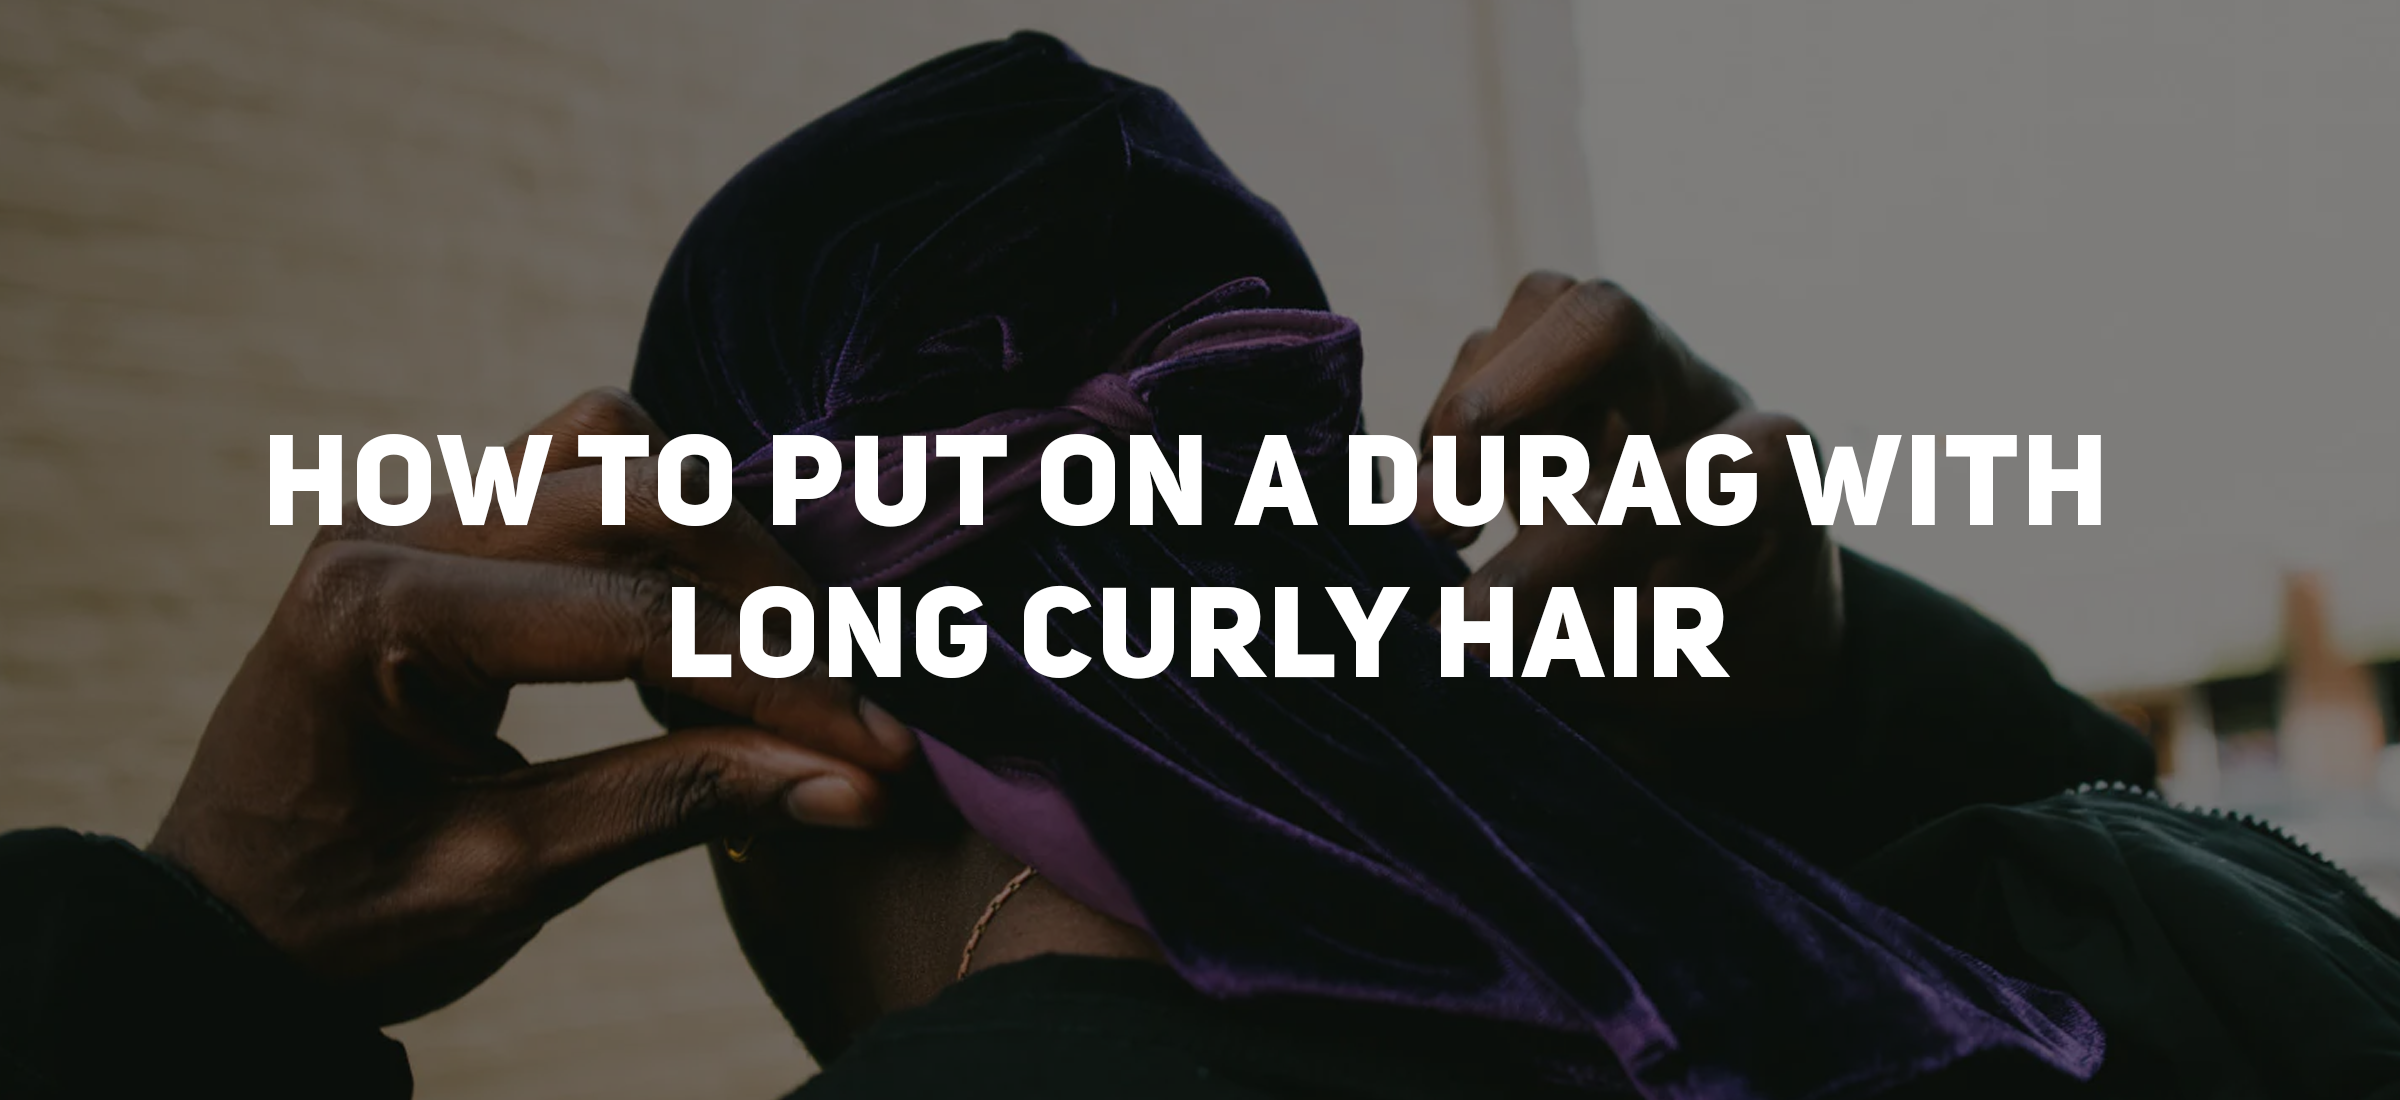 How to Put on a Durag with Long Curly Hair: Simple Steps for a Secure Fit